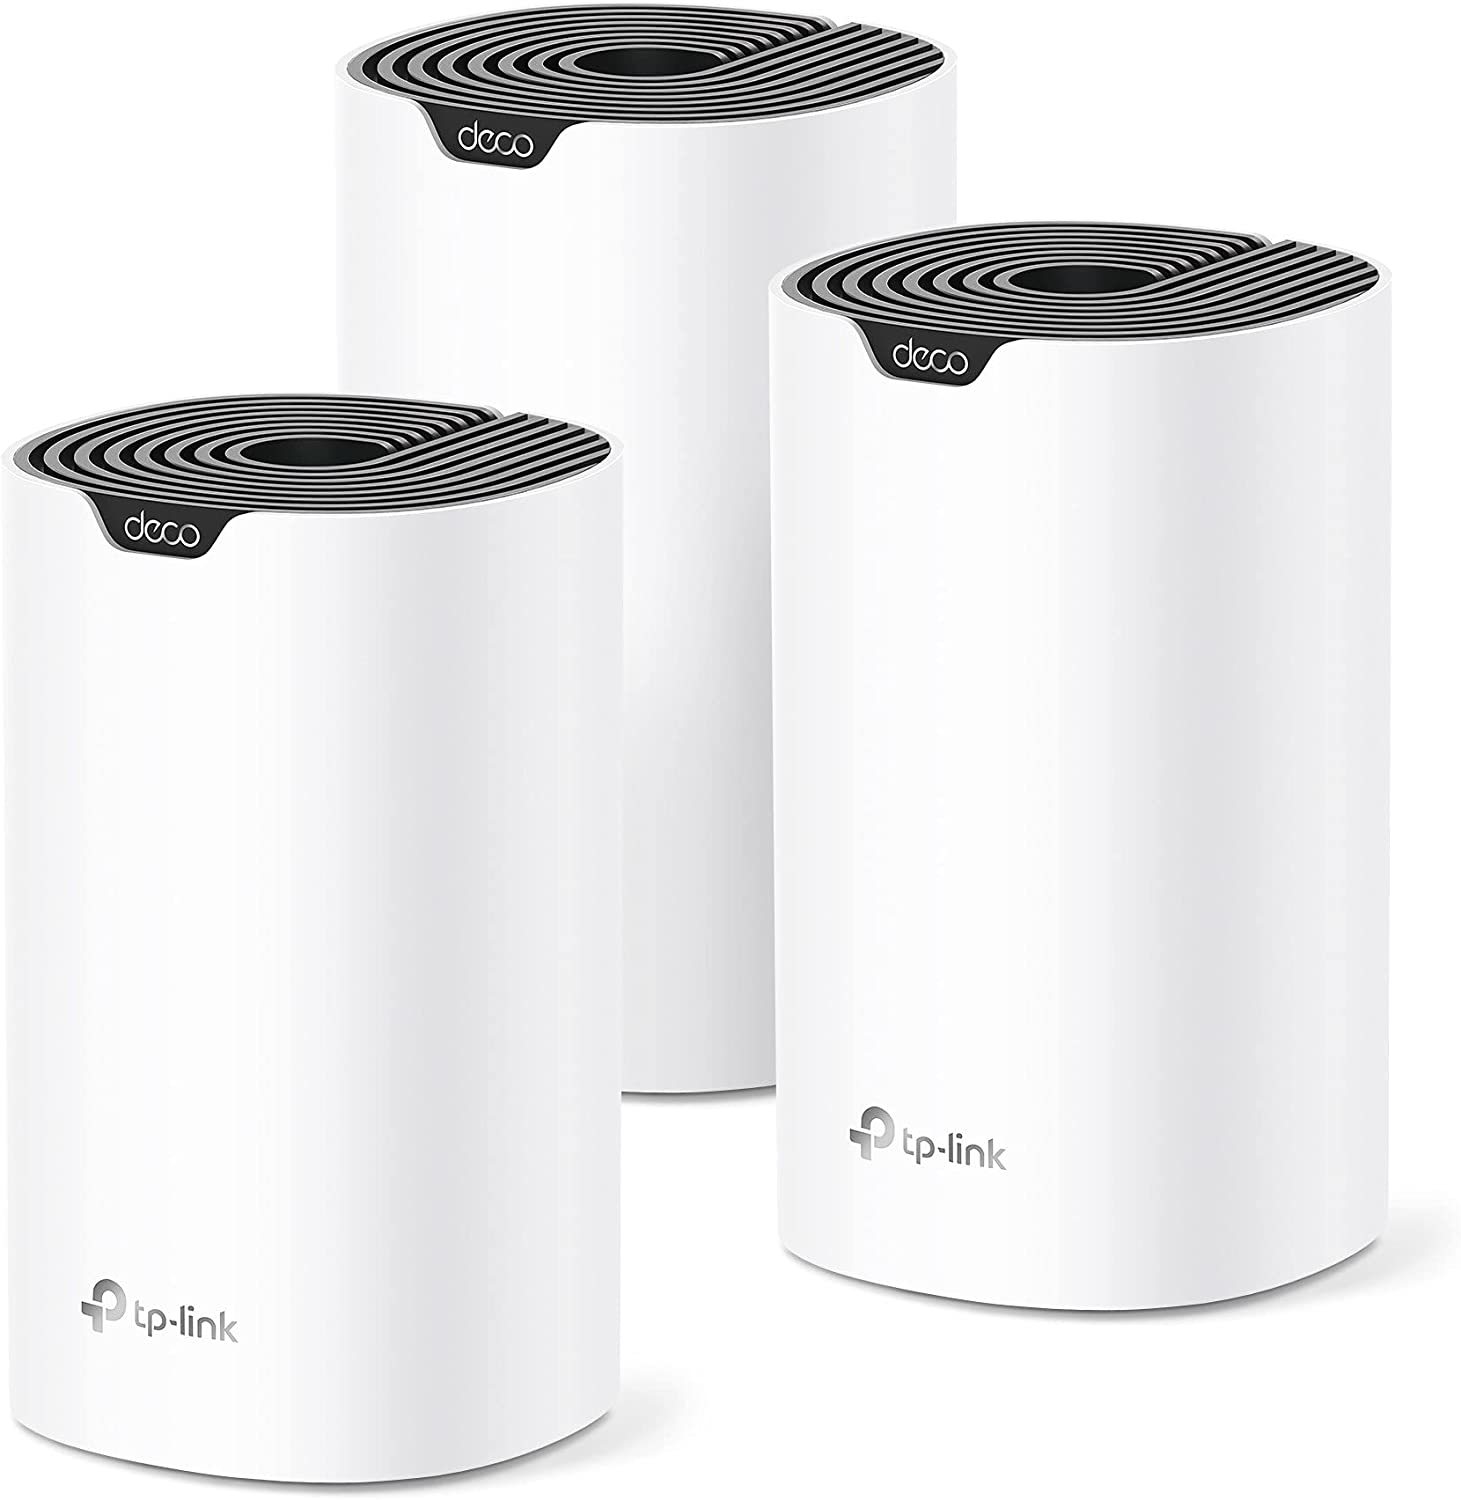 TP-Link Deco Mesh WiFi System (Deco S4) – Up to 5,500 Sq.ft. Coverage, Replaces - $148.99